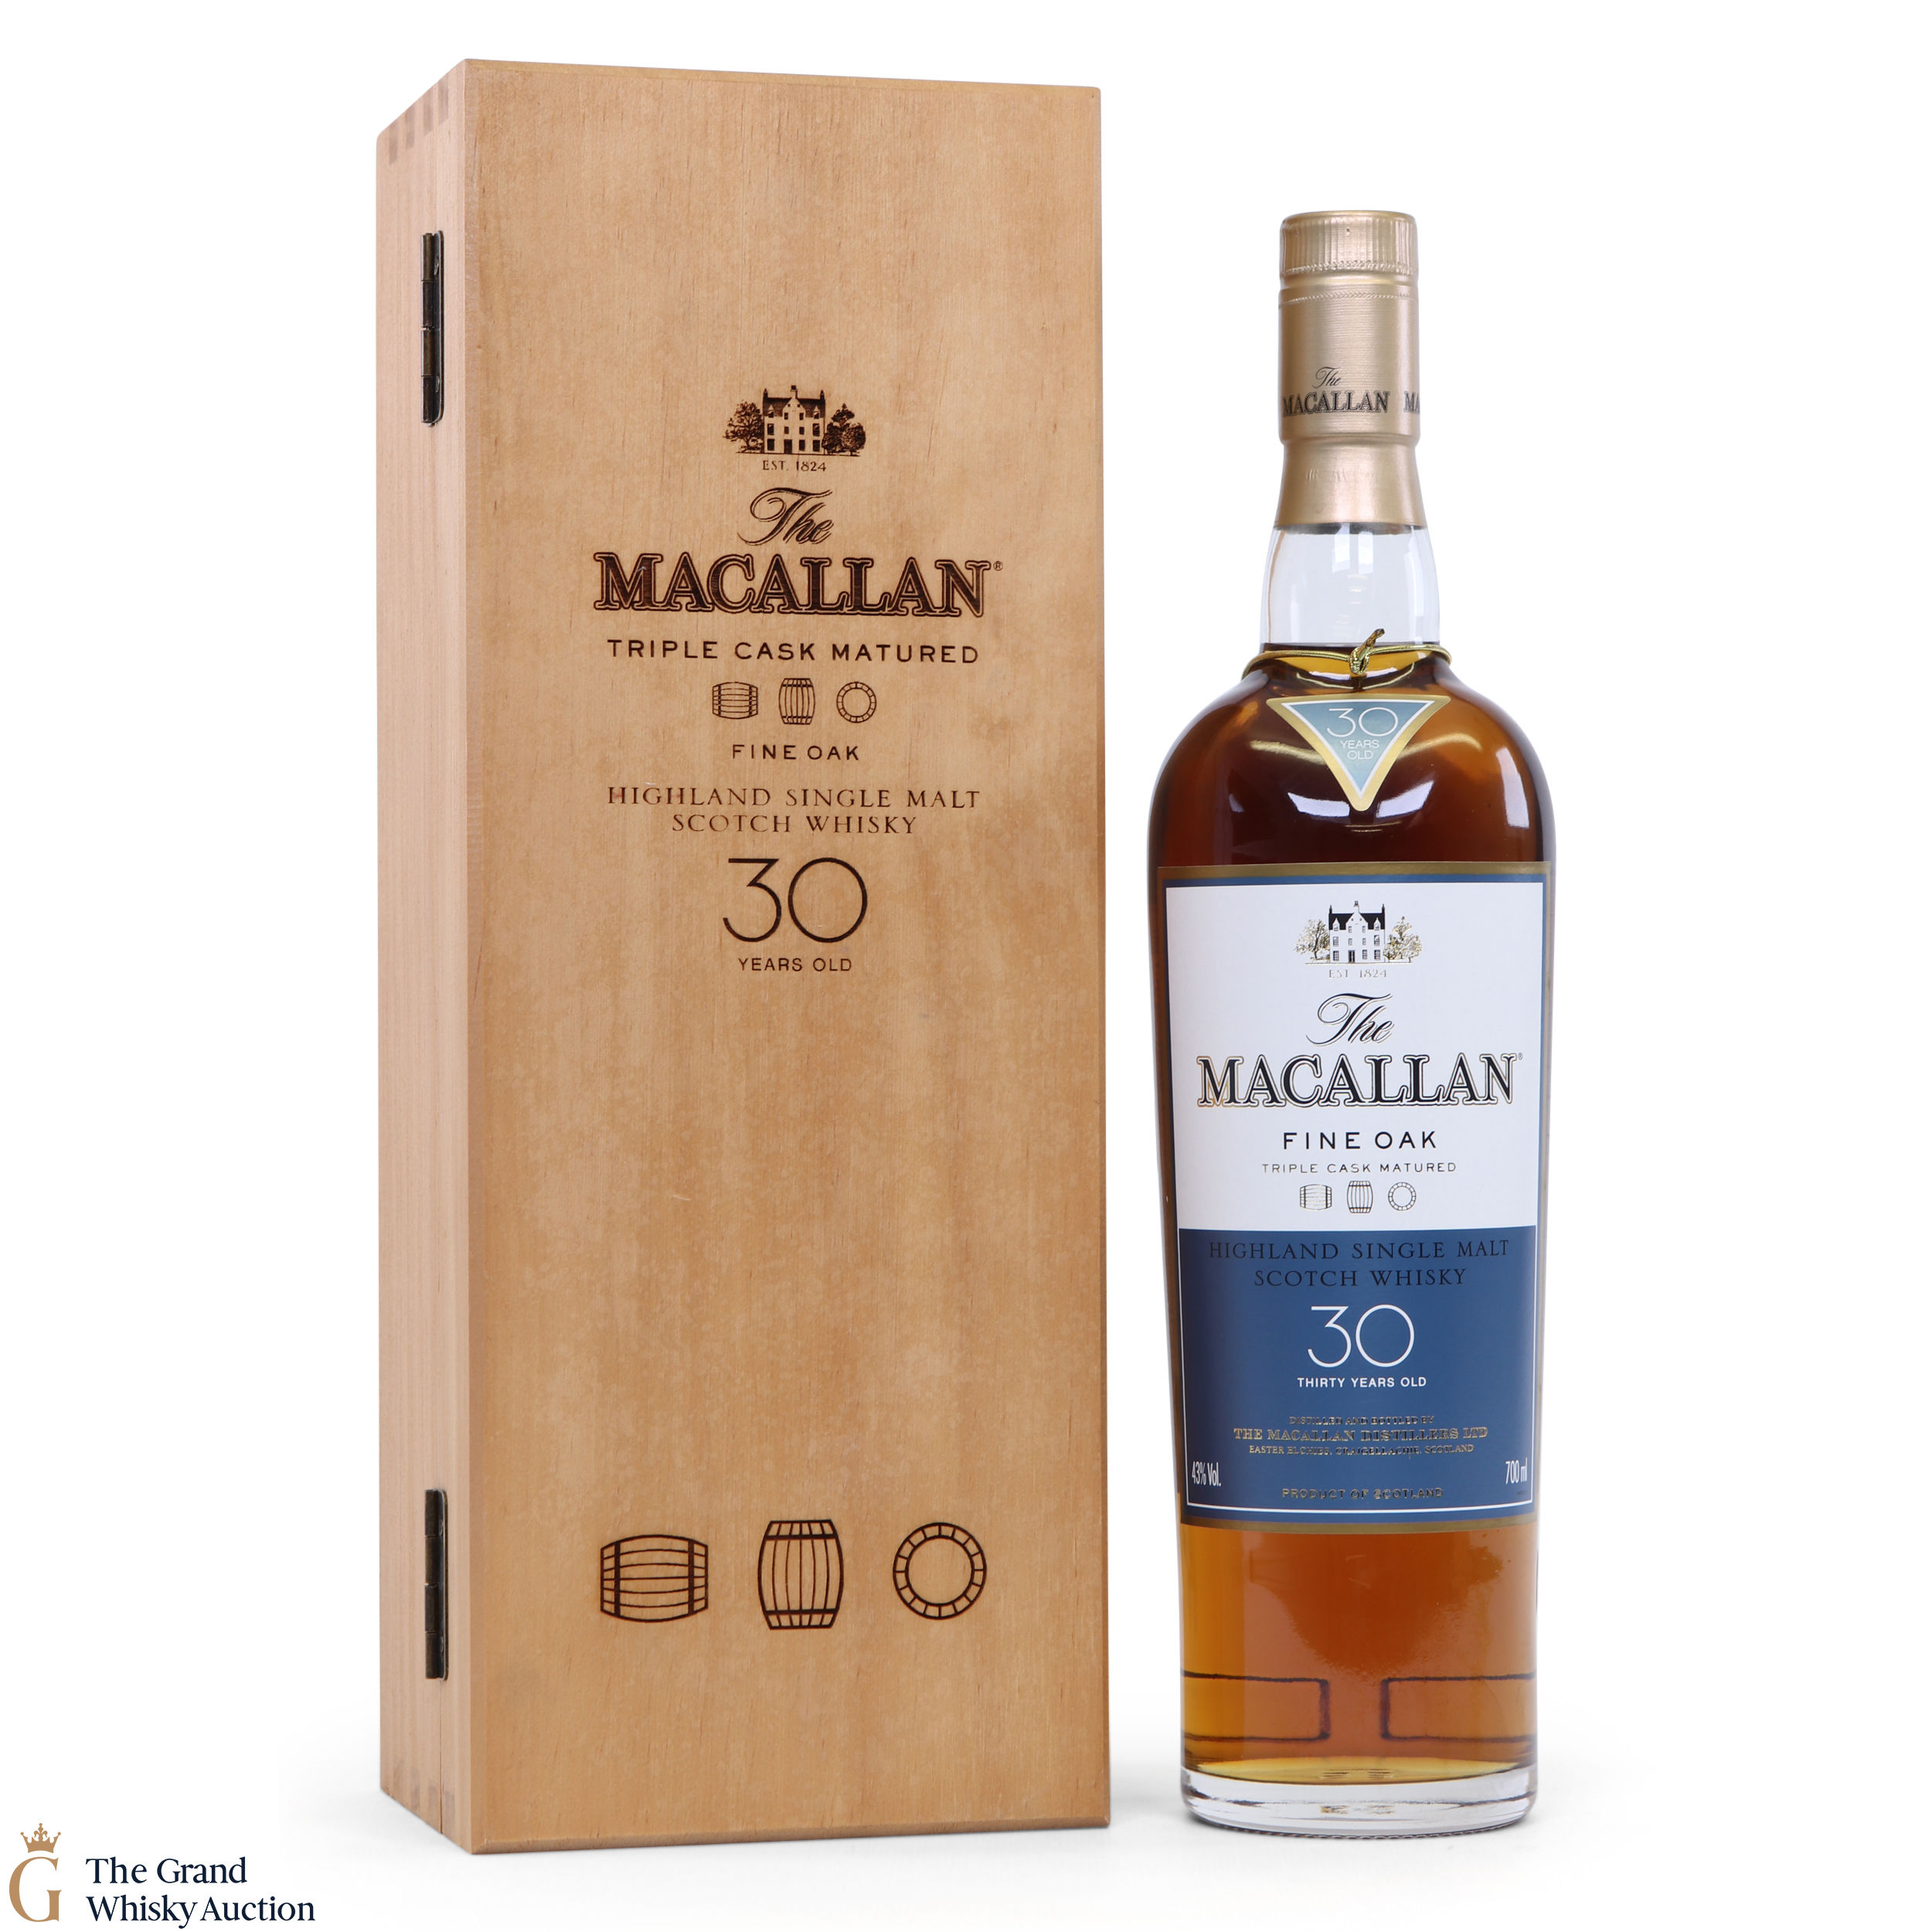 Macallan 30 Year Old Fine Oak Auction The Grand Whisky Auction